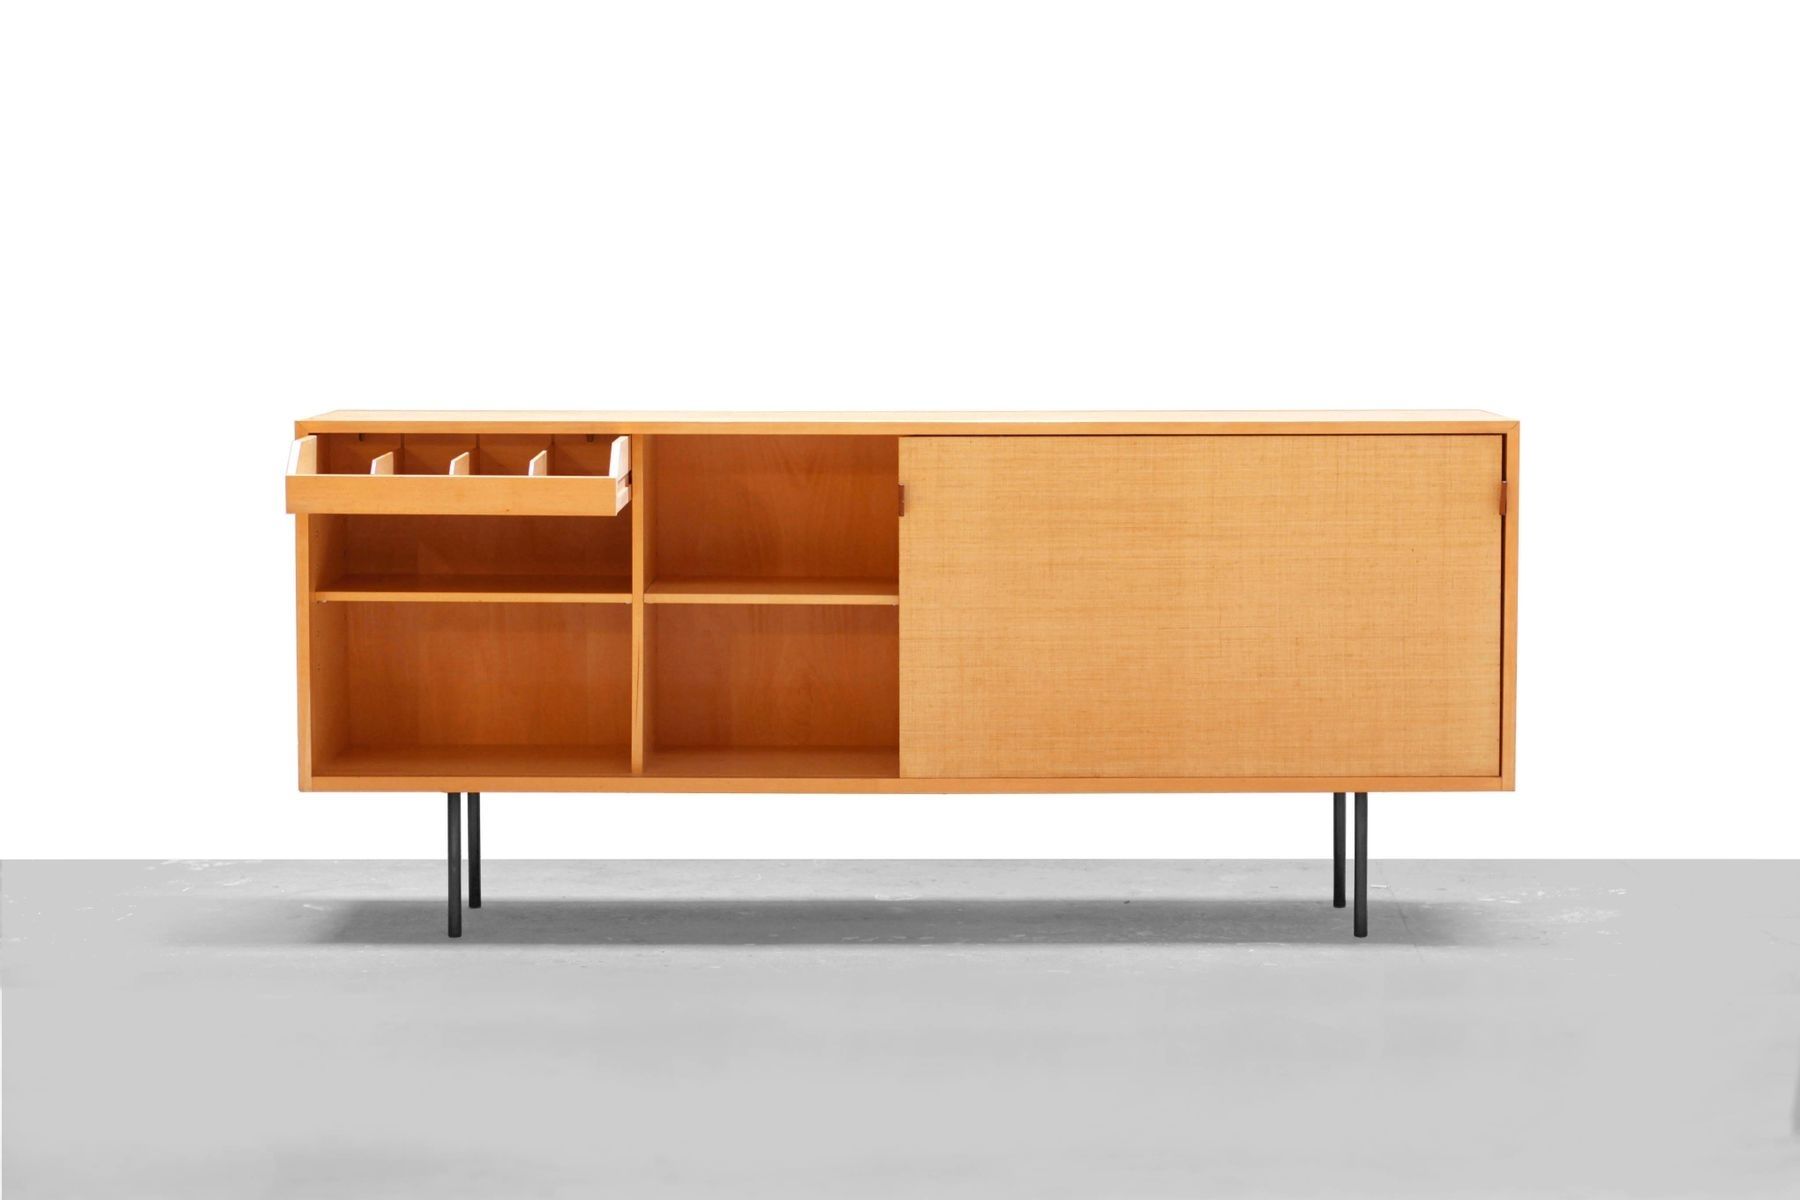 No. 118 Sideboardflorence Knoll For Knoll International, 1950s Intended For Latest Girard 4 Door Sideboards (Photo 9 of 20)